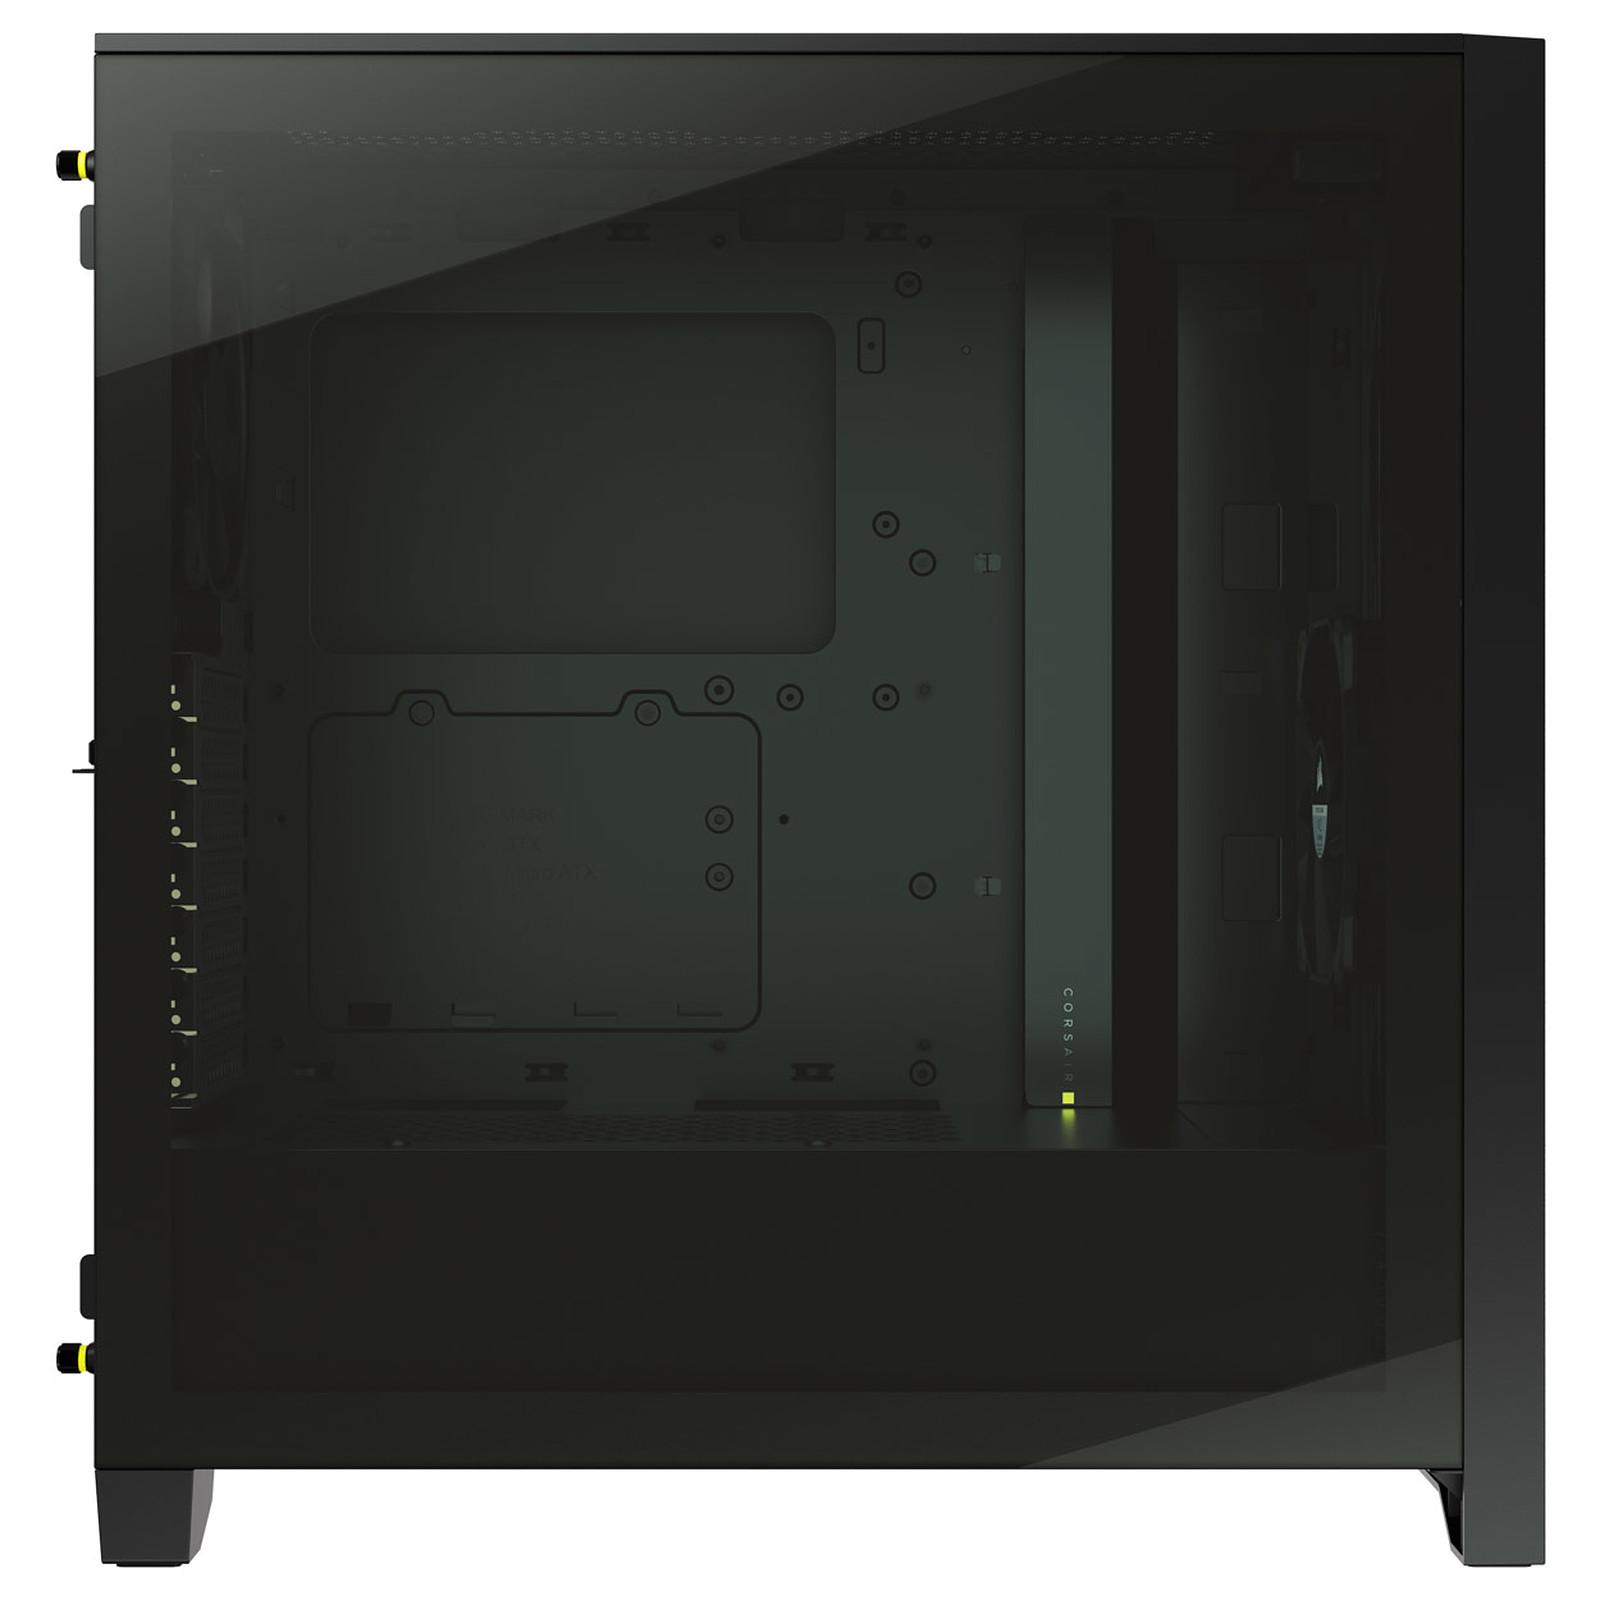 CORSAIR 4000D TEMPERED GLASS MID-TOWER BLACK